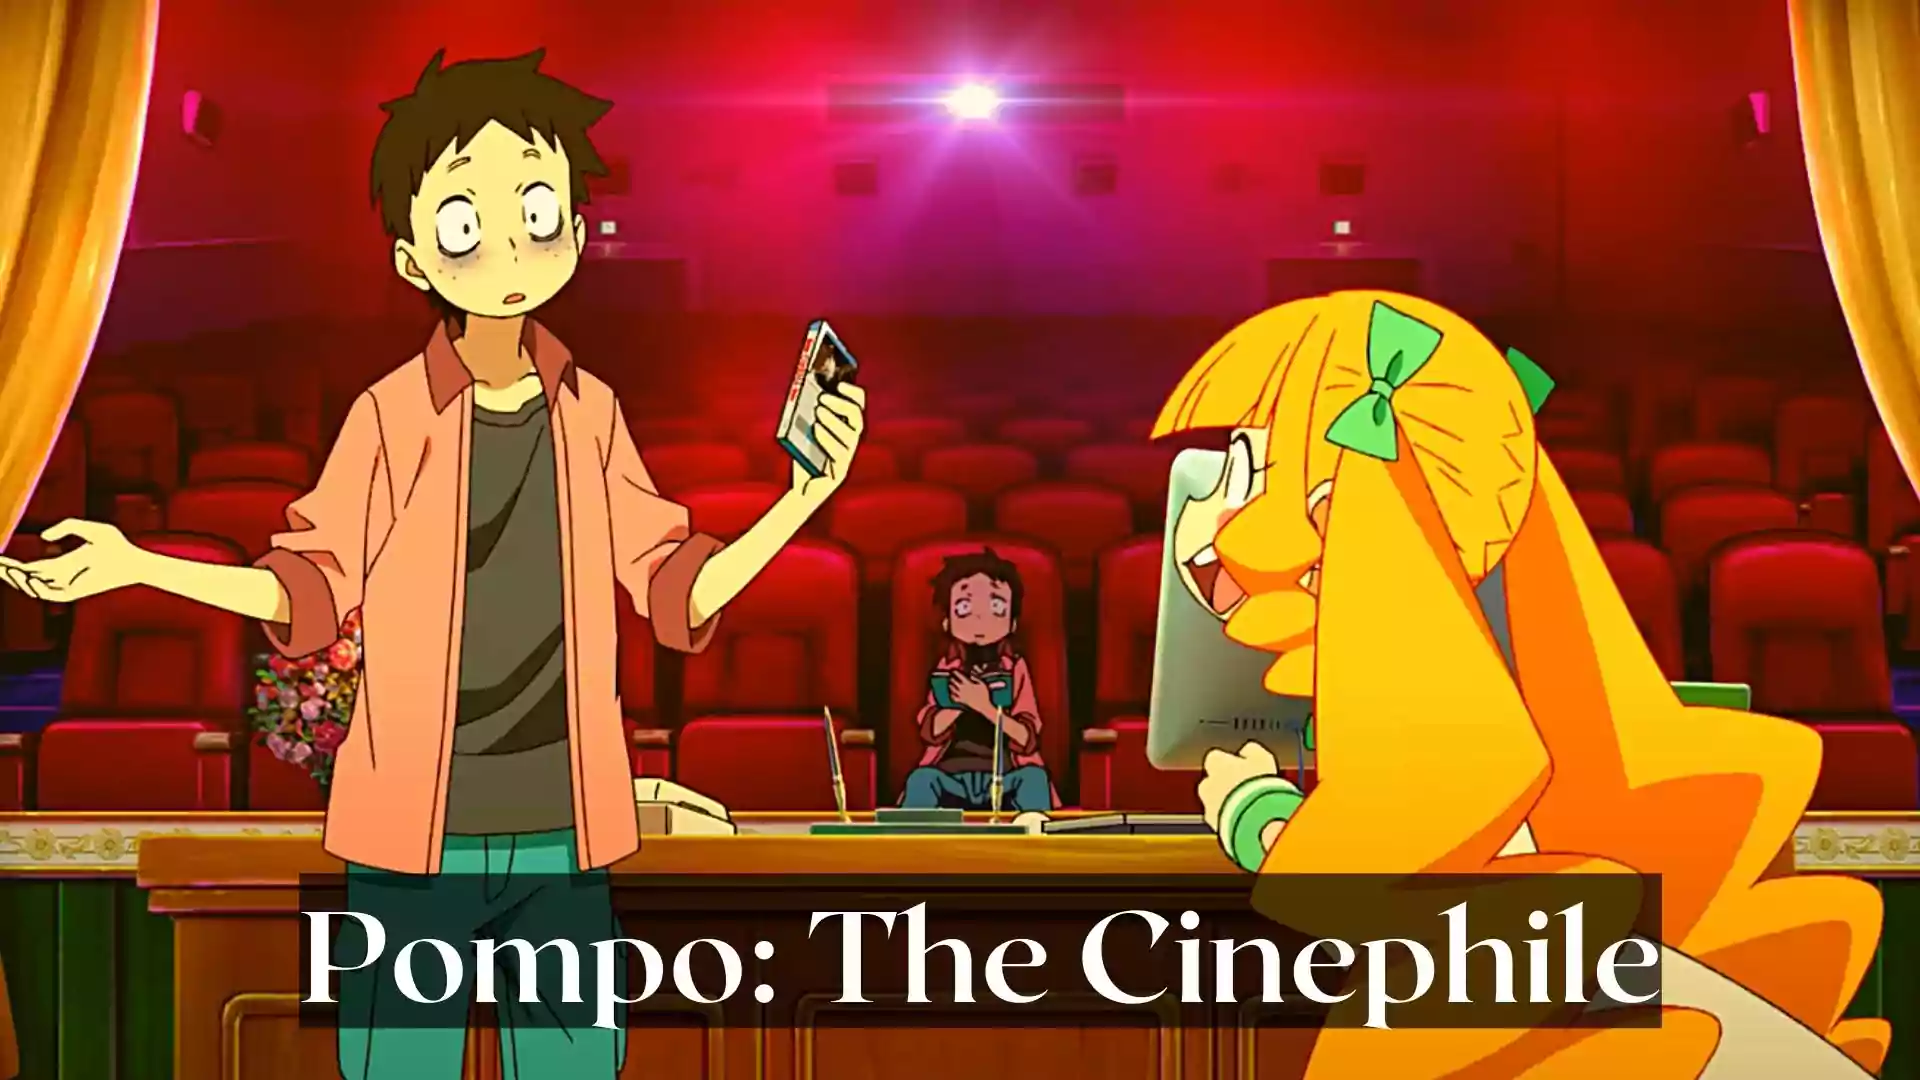 Pompo The Cinephile Wallpaper and Image